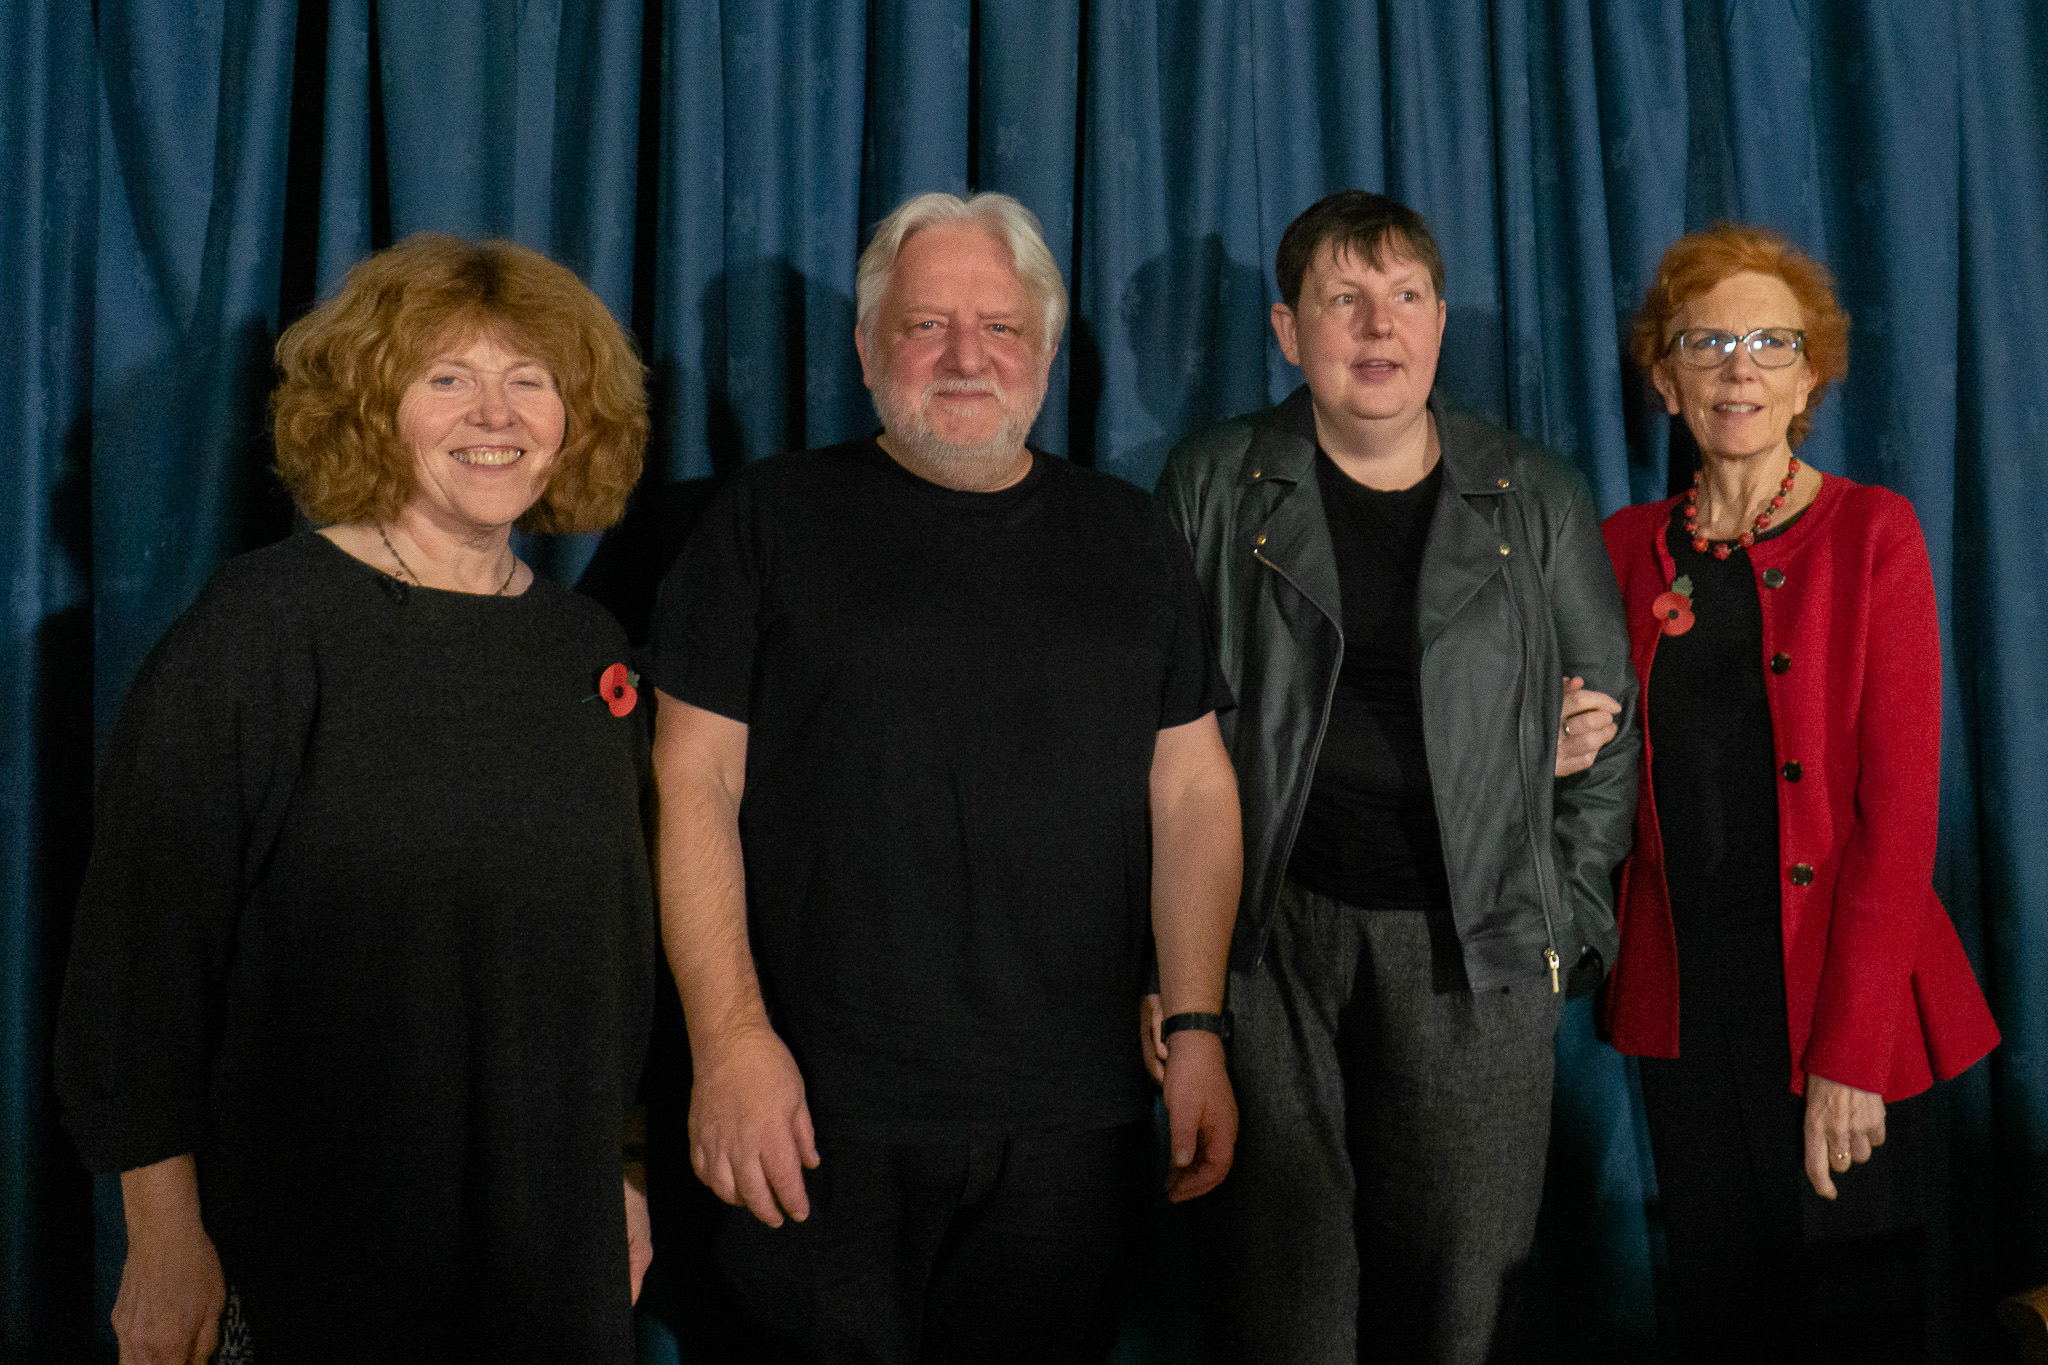 The speakers and hosts of our celebration of Shakespeare's first folio event.

From left to right: Professor Fiona Stafford, Sir Simon Russell Beale, Professor Emma Smith, Principal Jan Royall